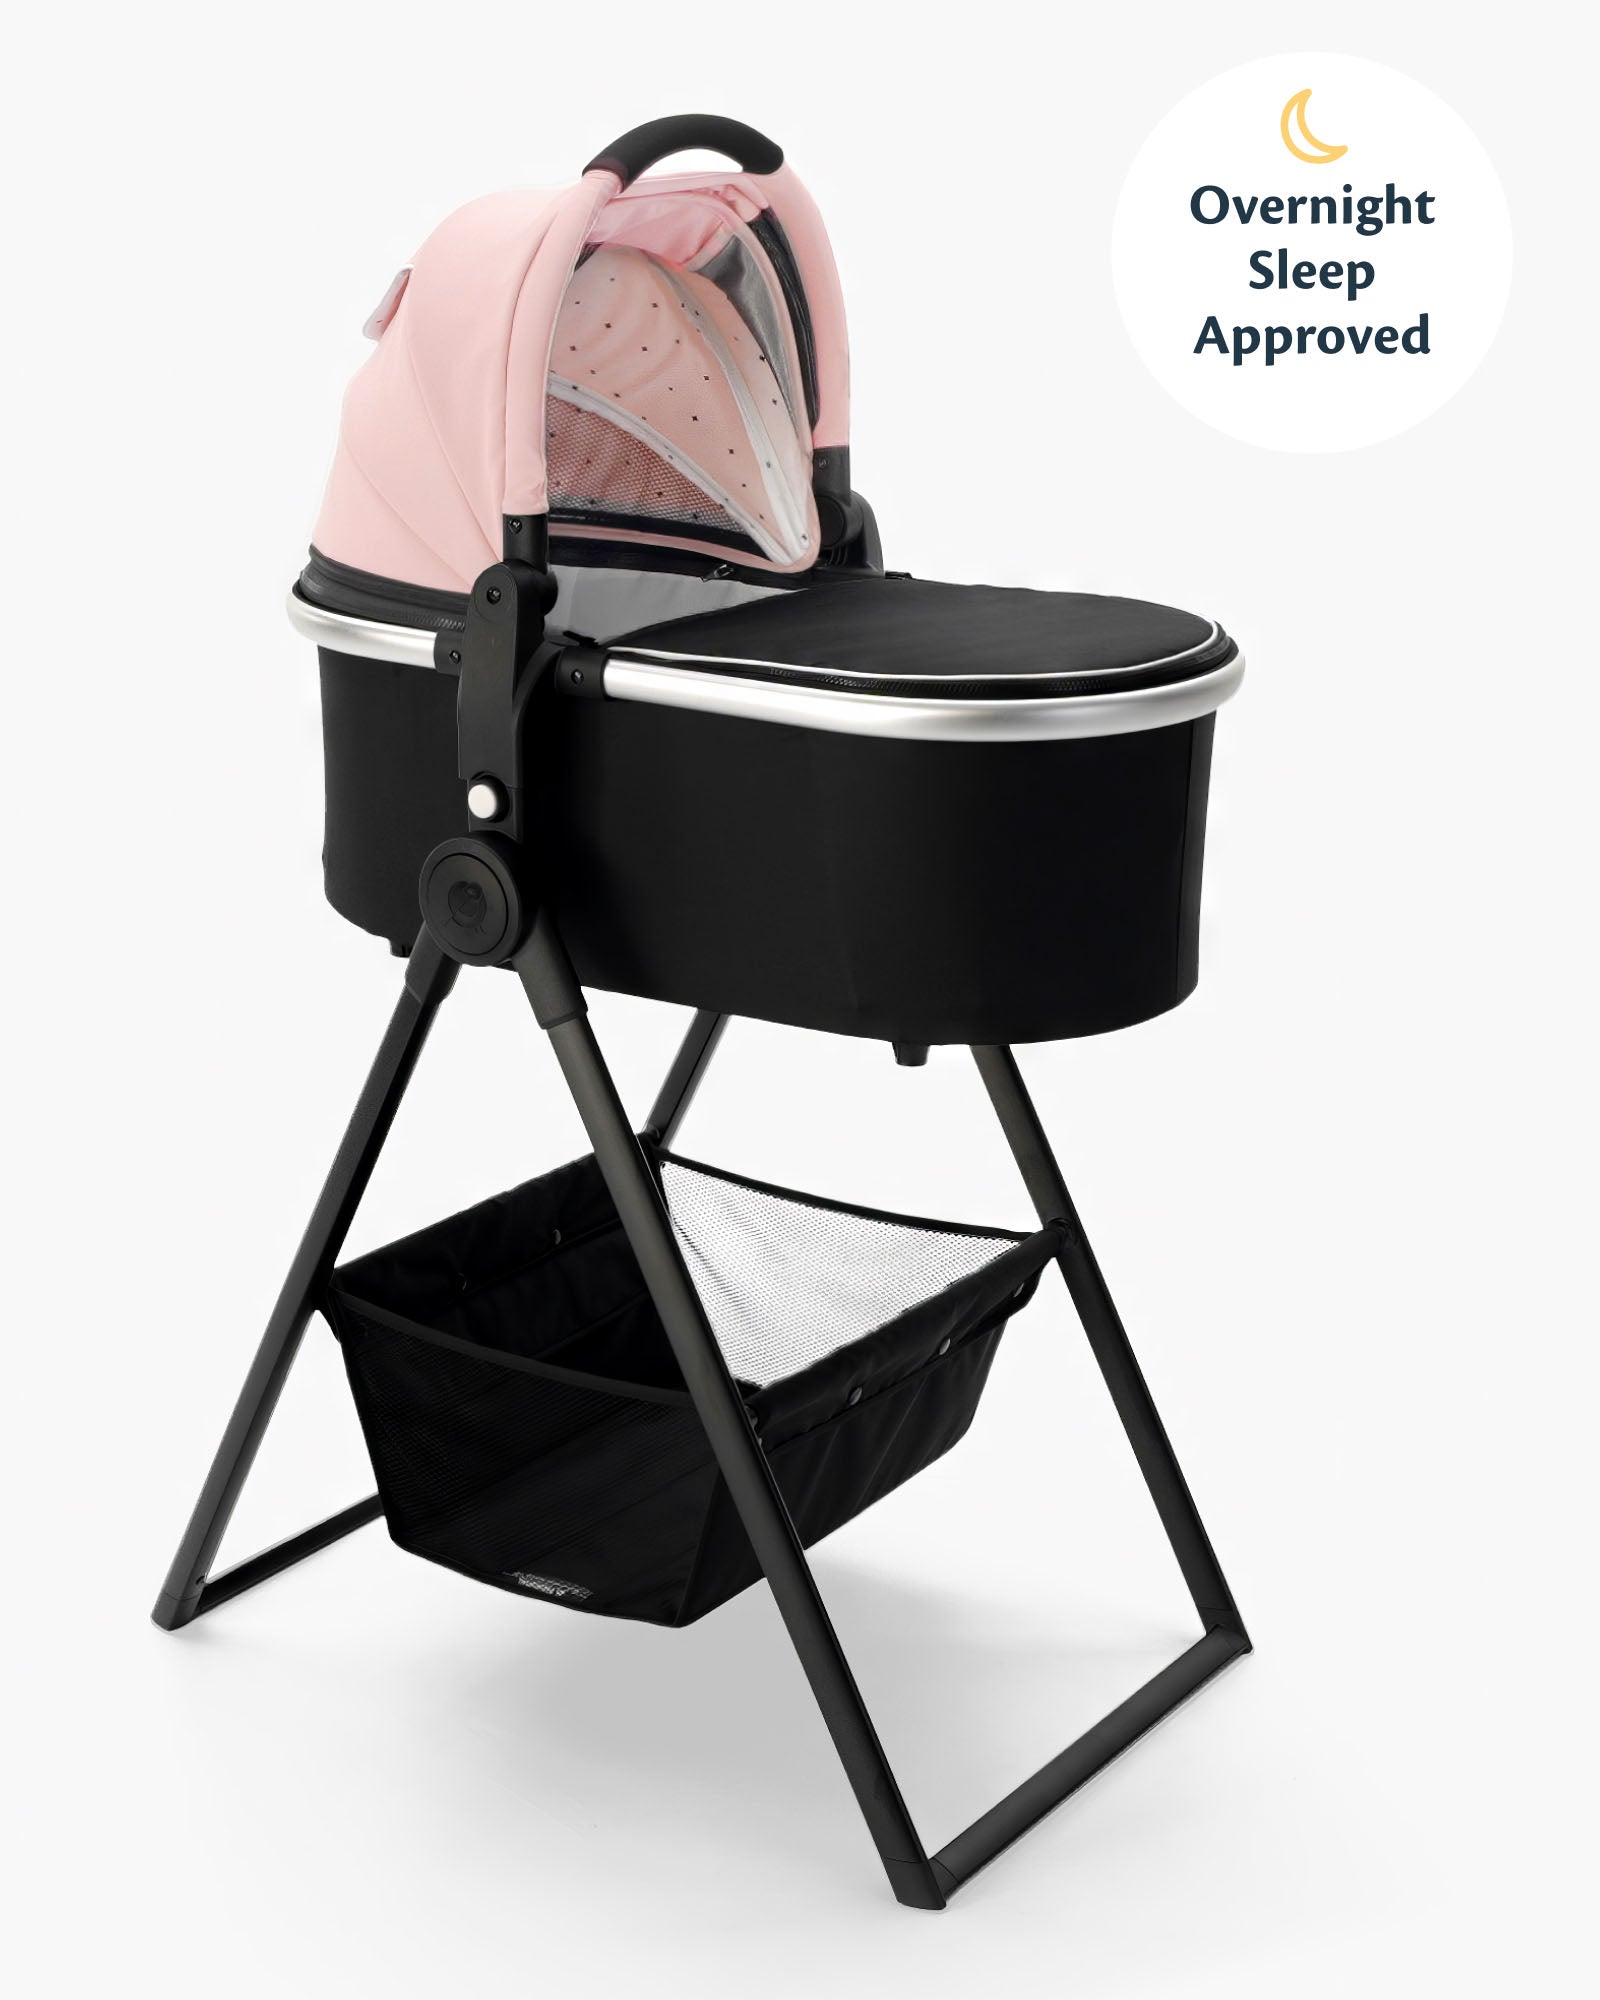 A black mockingbird-prod bassinet on a metal mockingbird-prod bassinet stand, featuring an attached pink baby backpack with an "overnight sleep approved" label. #color_bloom